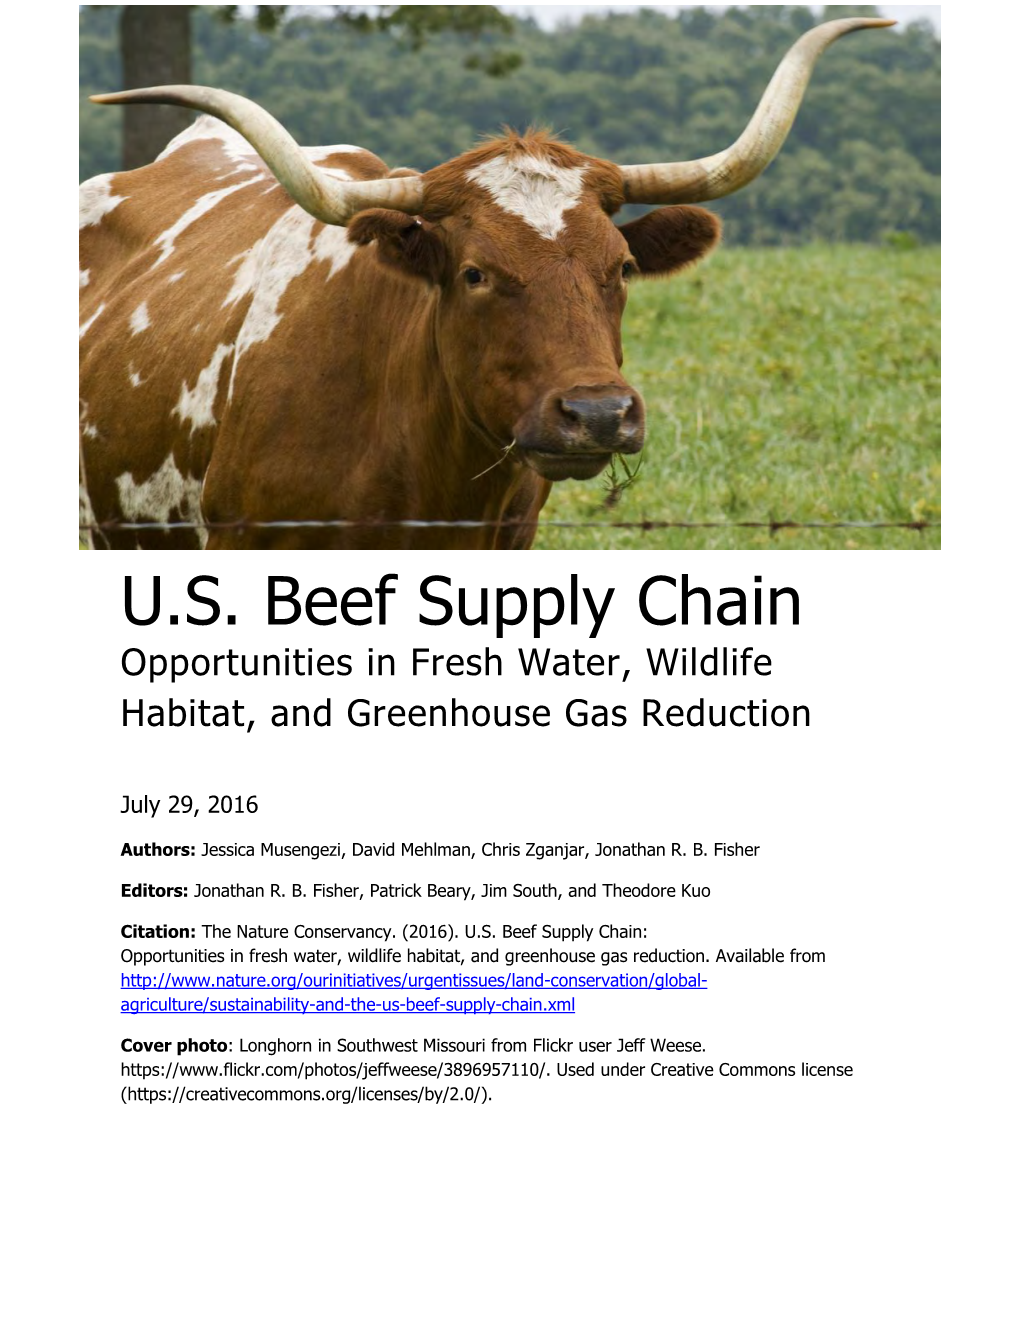 U.S. Beef Supply Chain Opportunities in Fresh Water, Wildlife Habitat, and Greenhouse Gas Reduction